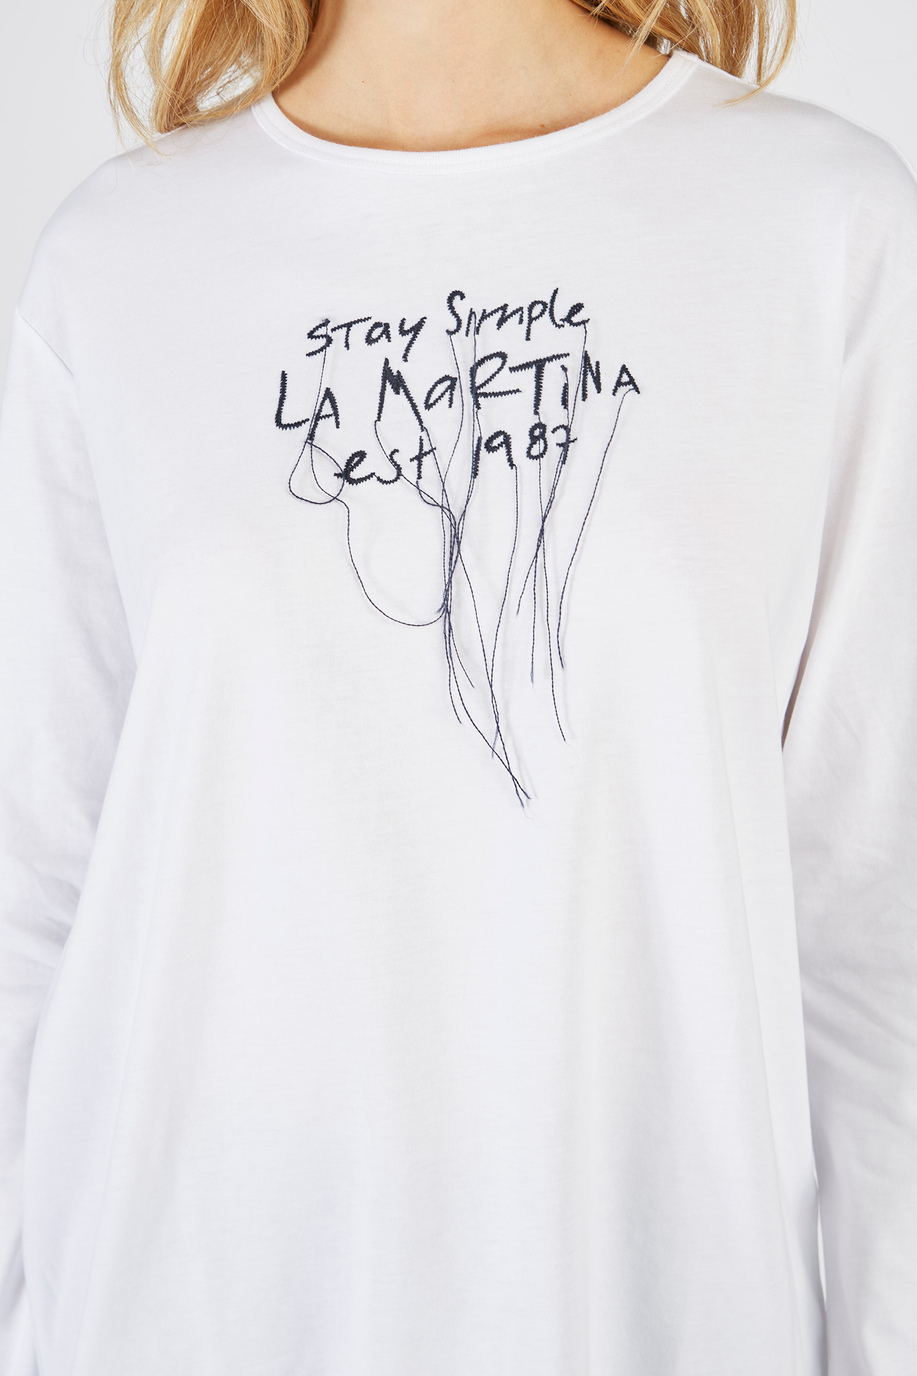 T-shirt donna girocollo in cotone maniche lunghe regular fit - Timeless | La Martina - Official Online Shop